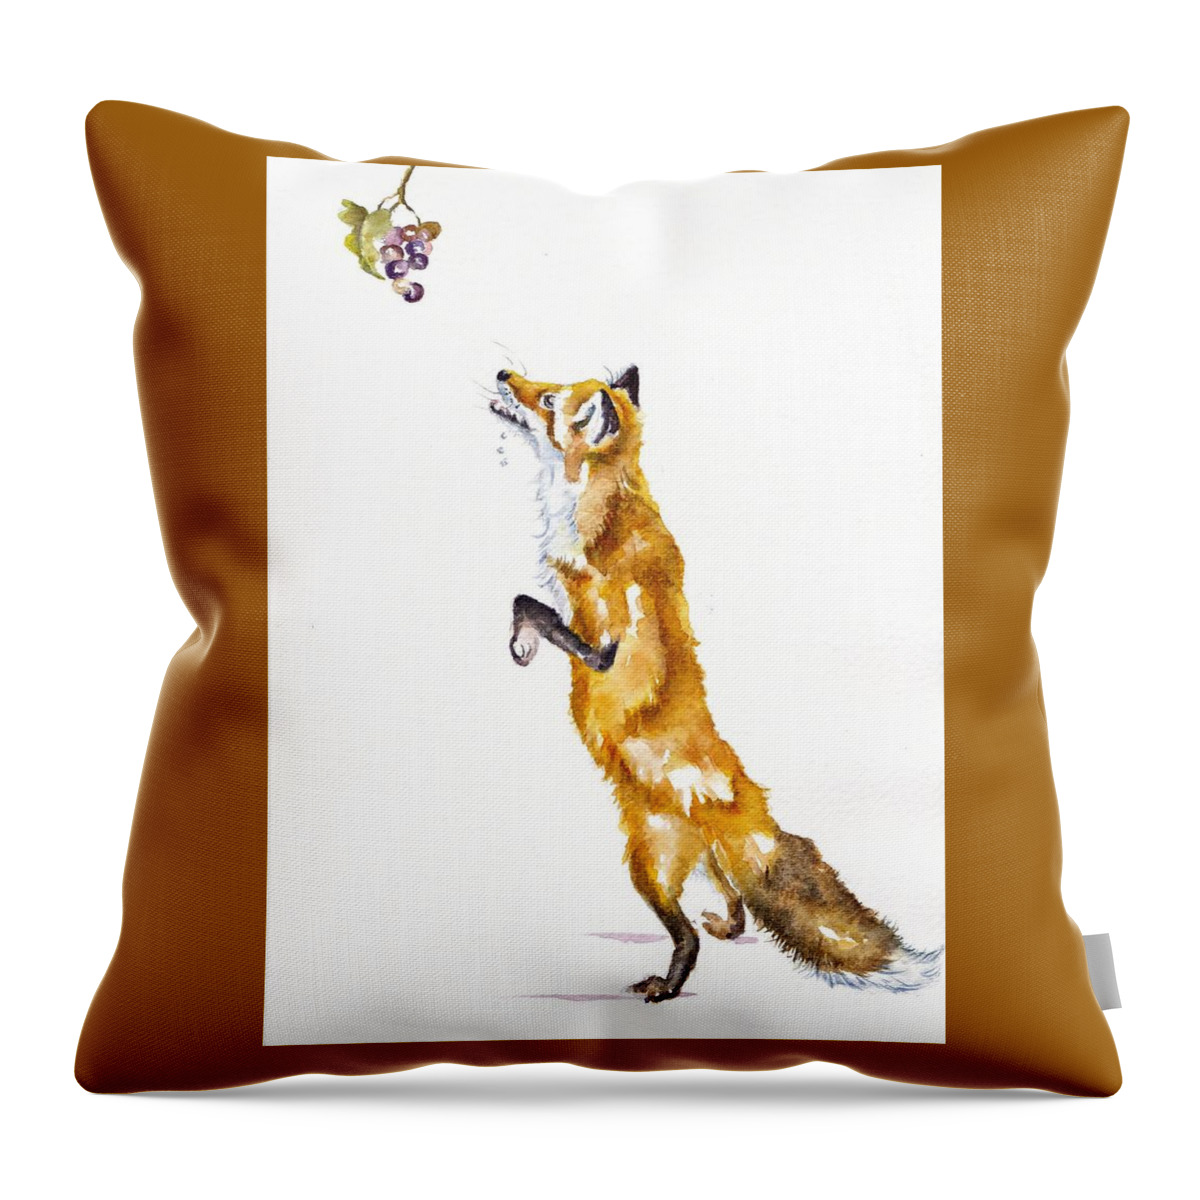 Aesop's Fables Throw Pillow featuring the painting The Fox and the Grapes by Debra Hall